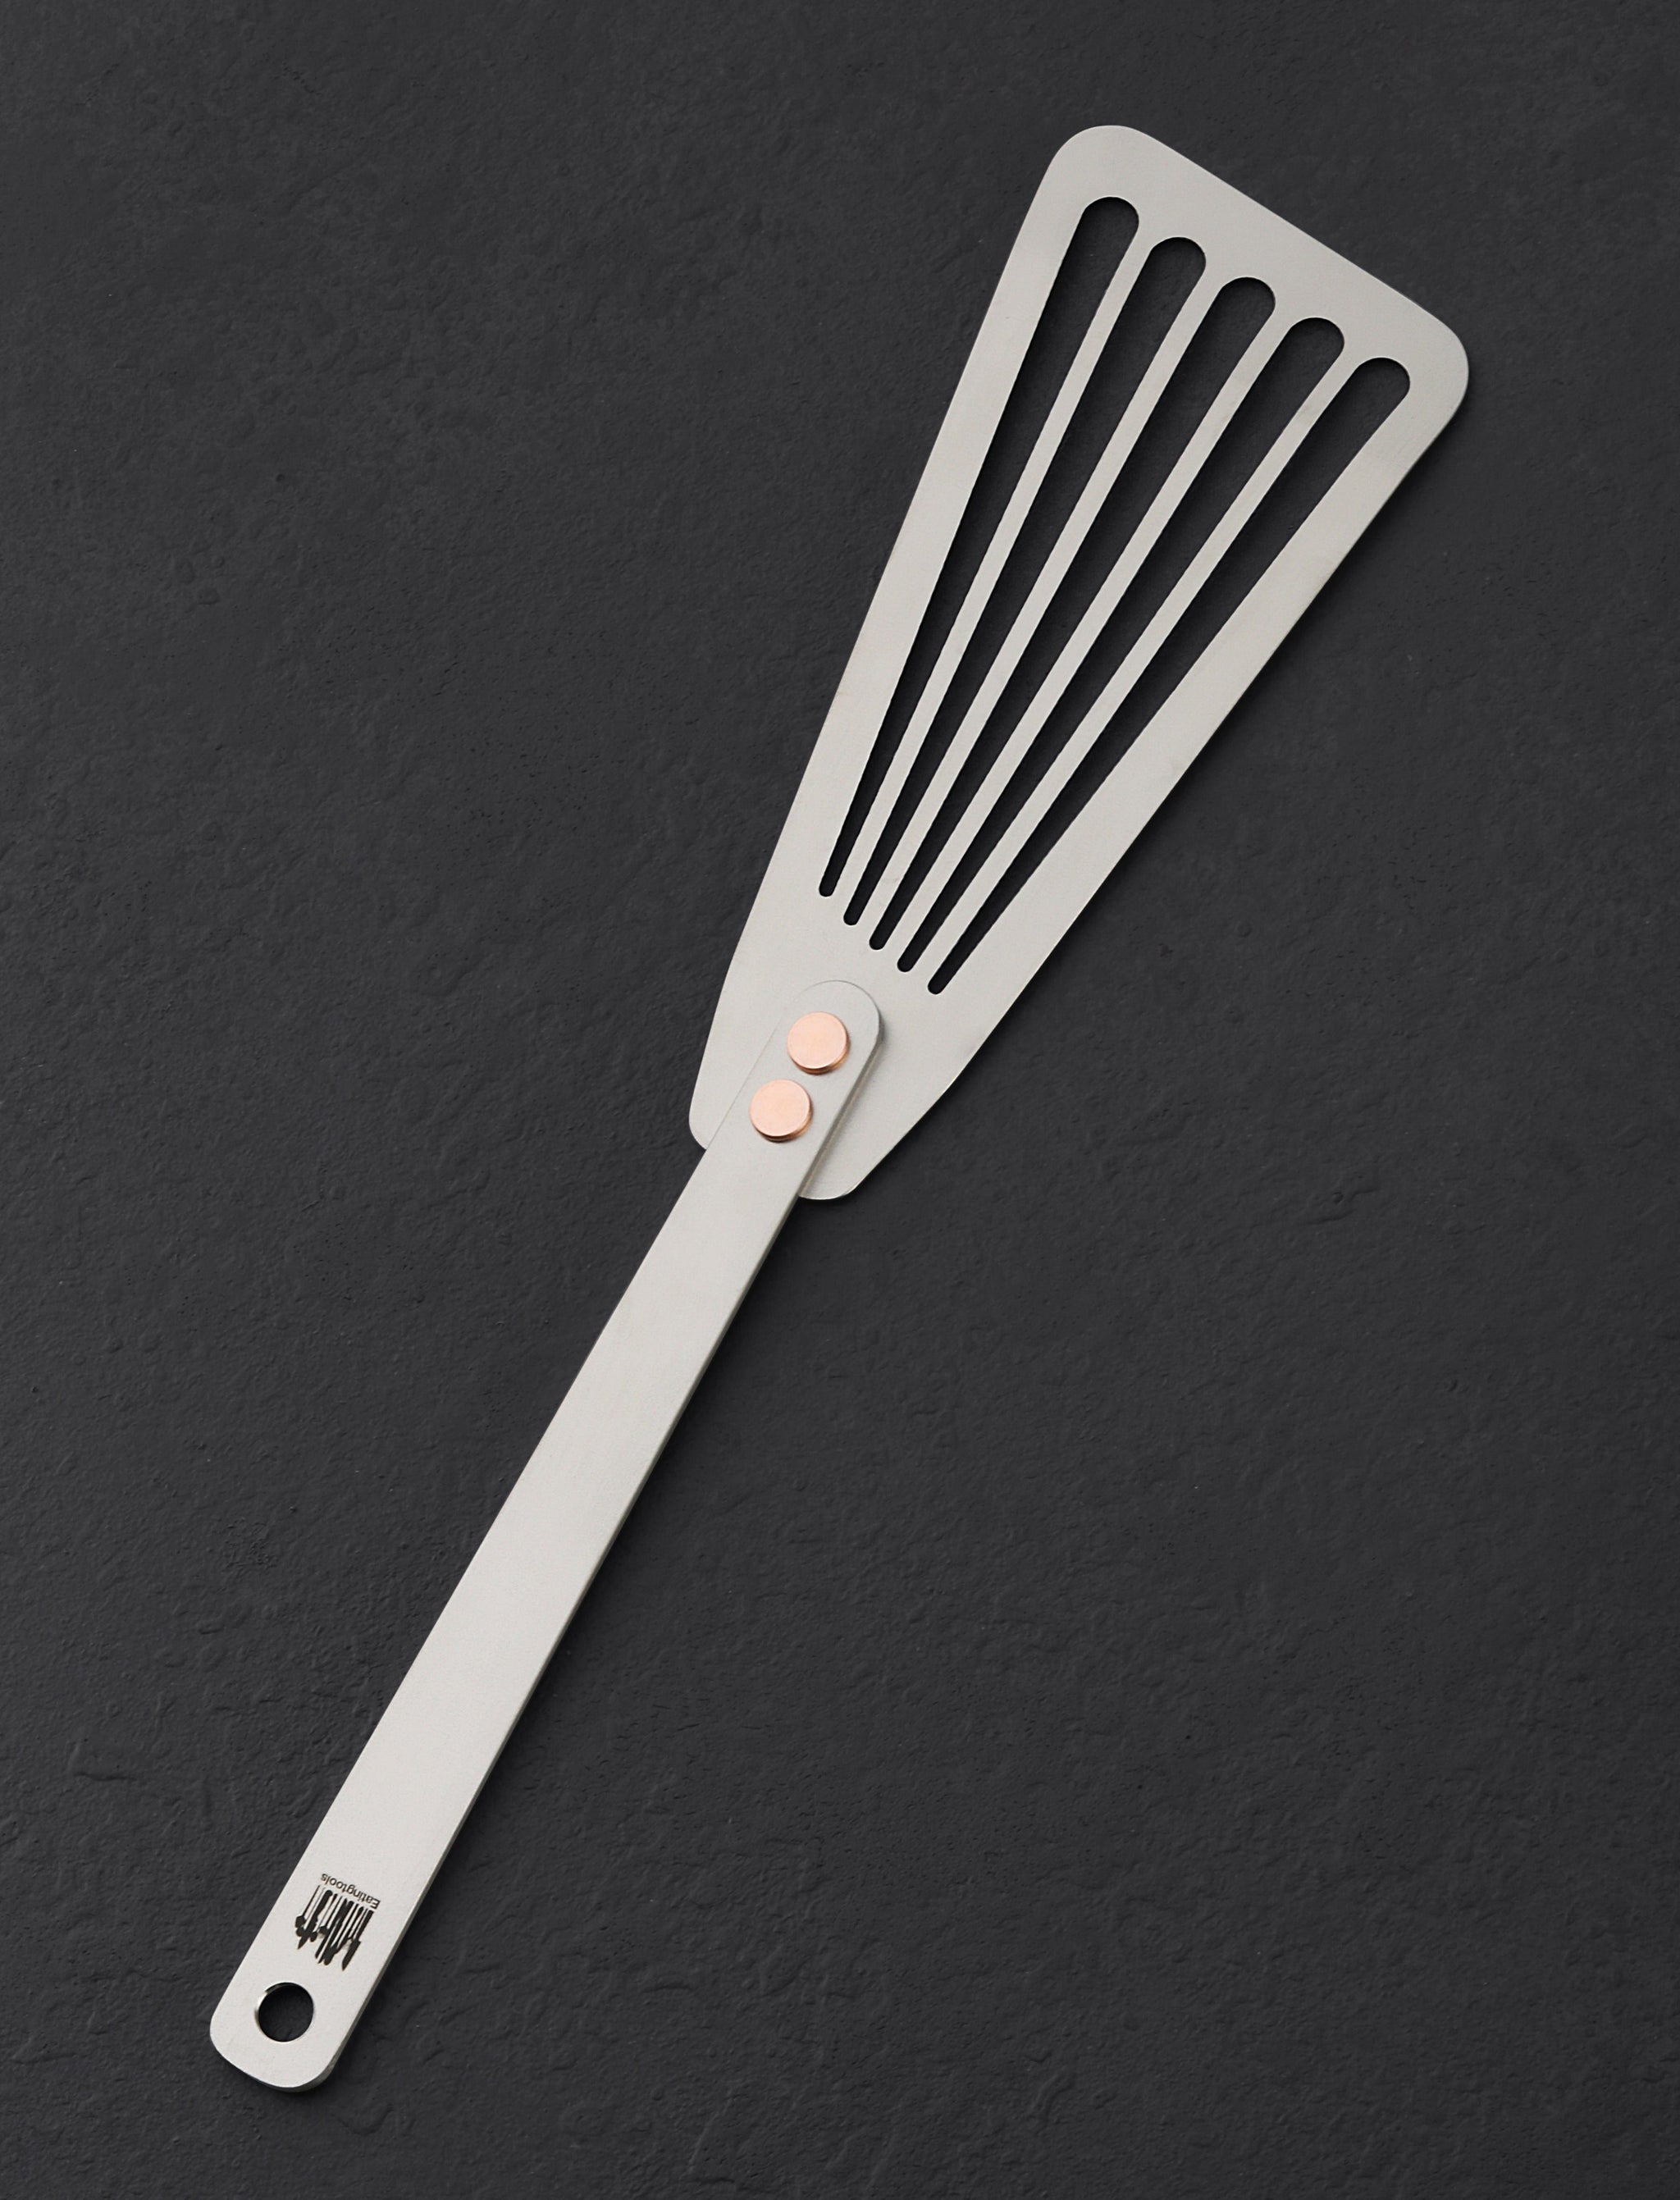 Authentic Vintage Pampered Chef Mini Spatula Taiwan / Vintage 8 inch Small  Stainless Steel Slotted Spatula with Black Plastic Handle